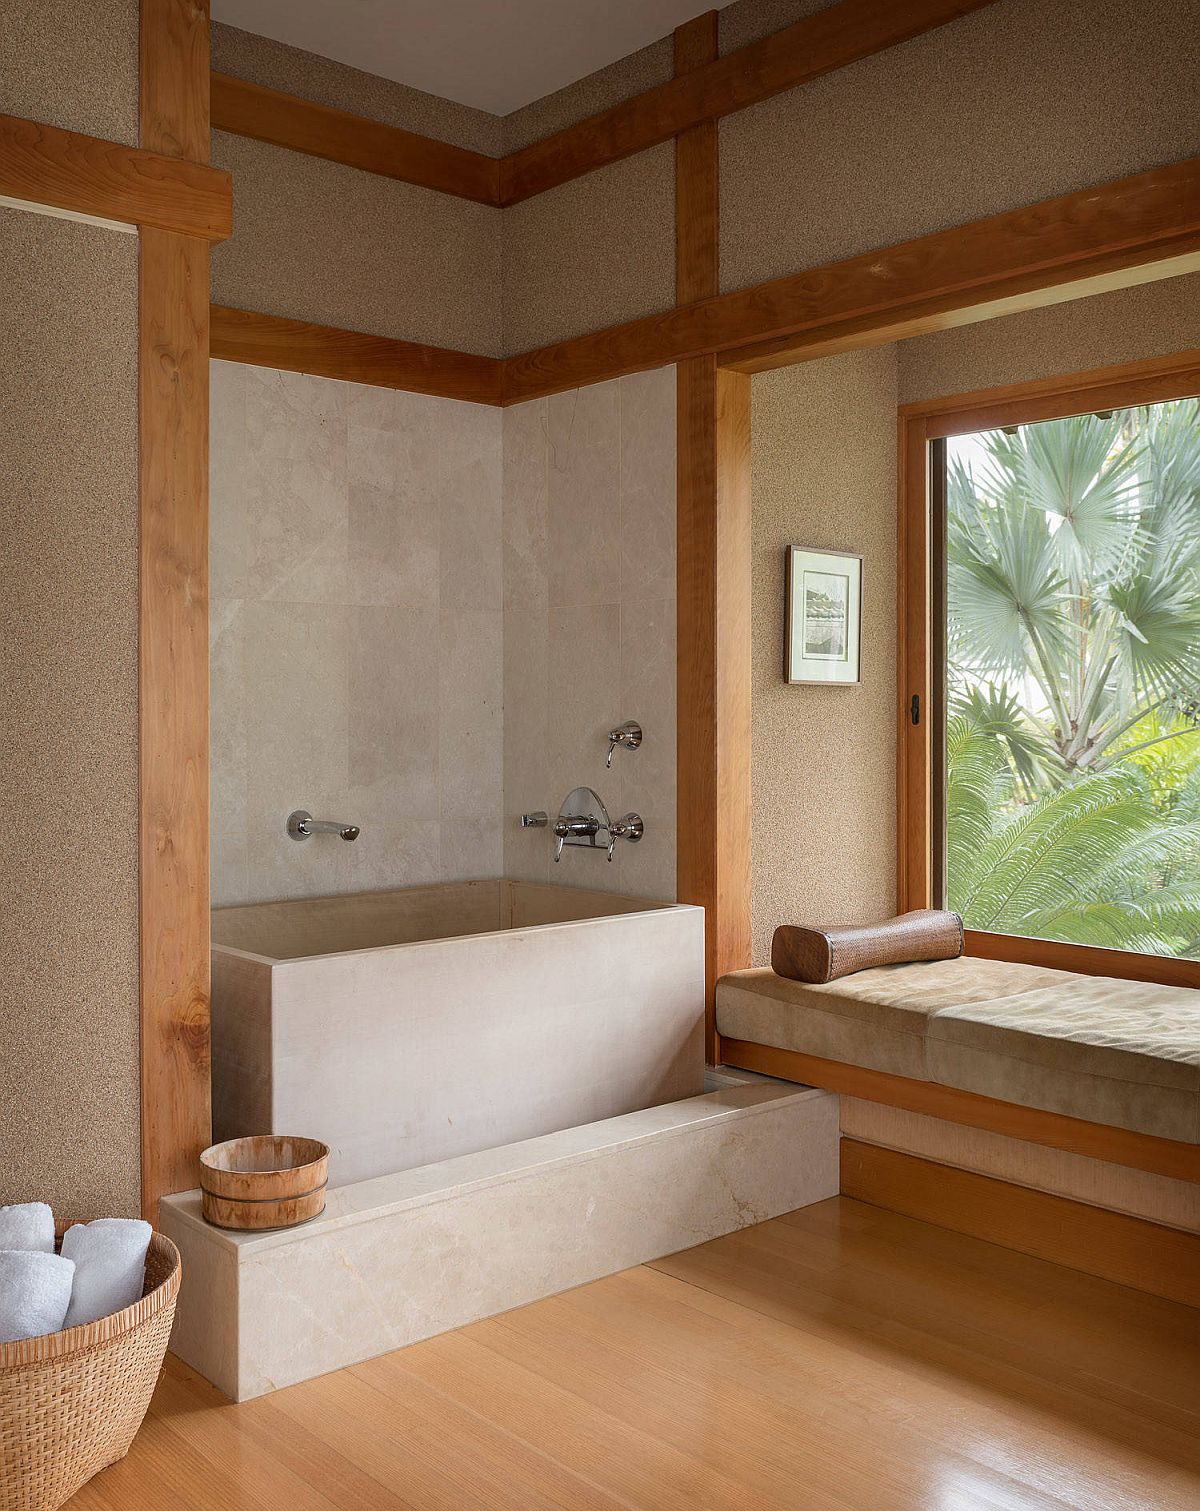 Modern Asian style bathroom with a smart soaking tub in the corner